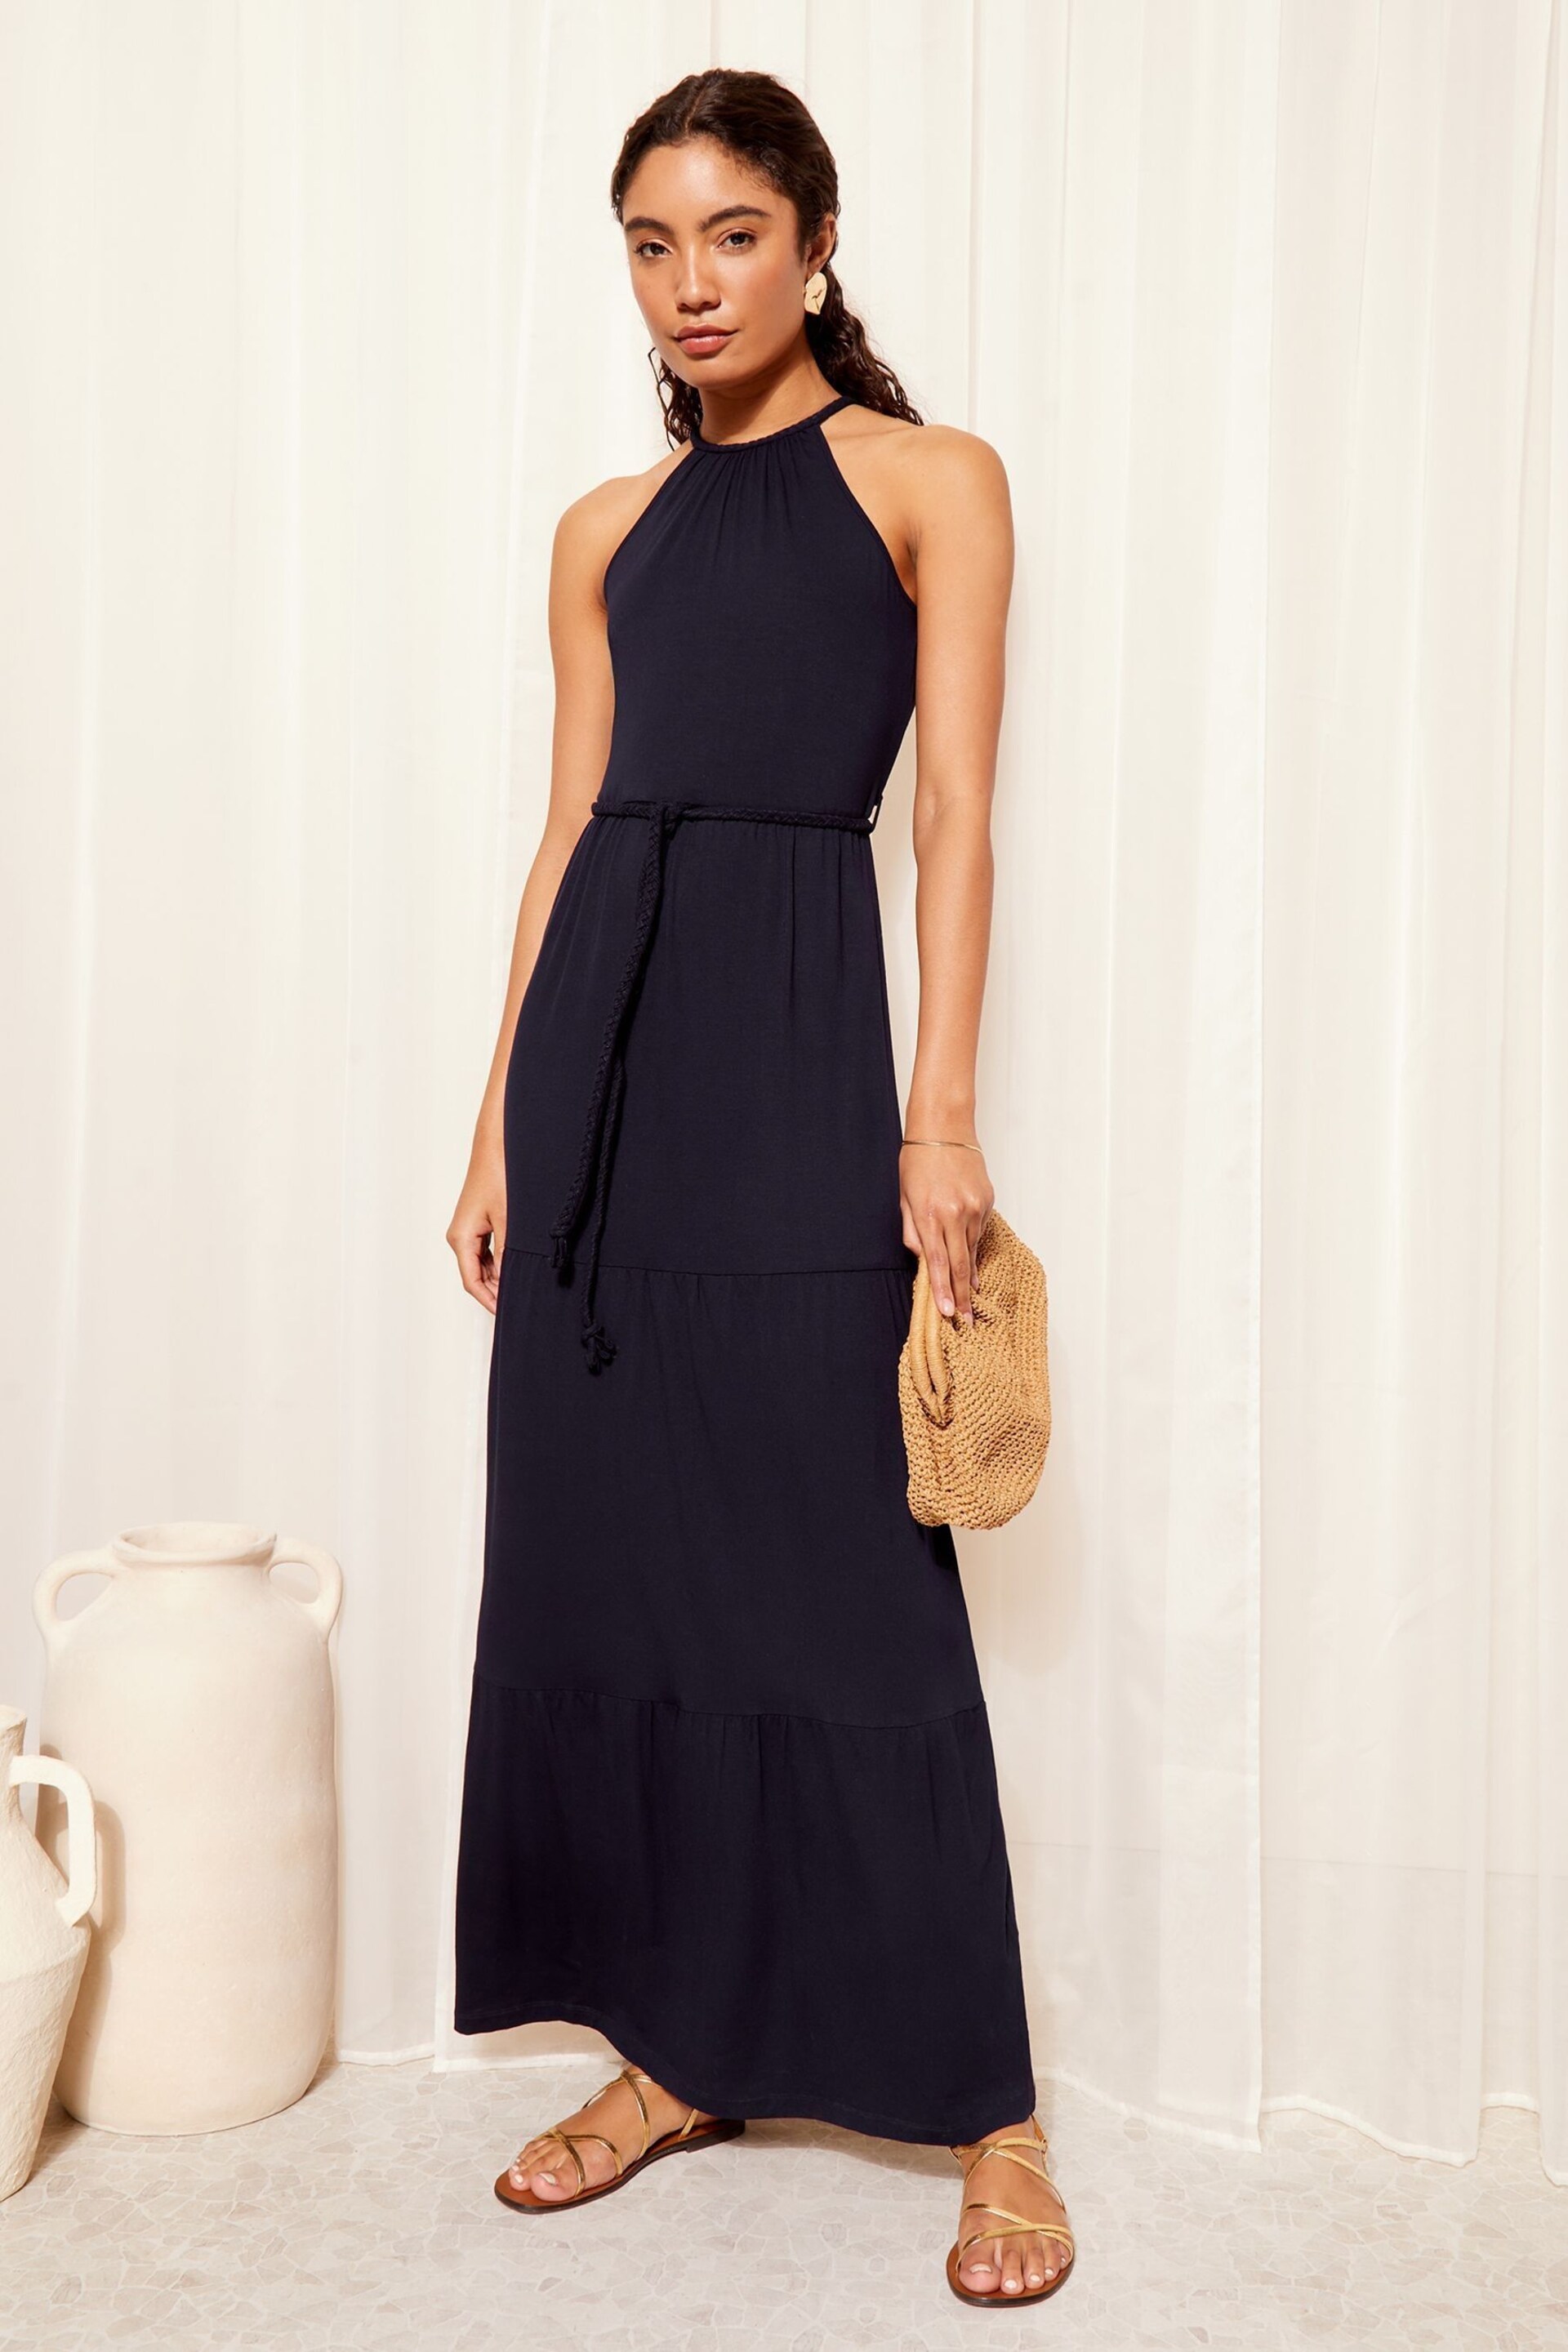 Friends Like These Navy Blue Halter Jersey Dress With Tie Belt - Image 1 of 4